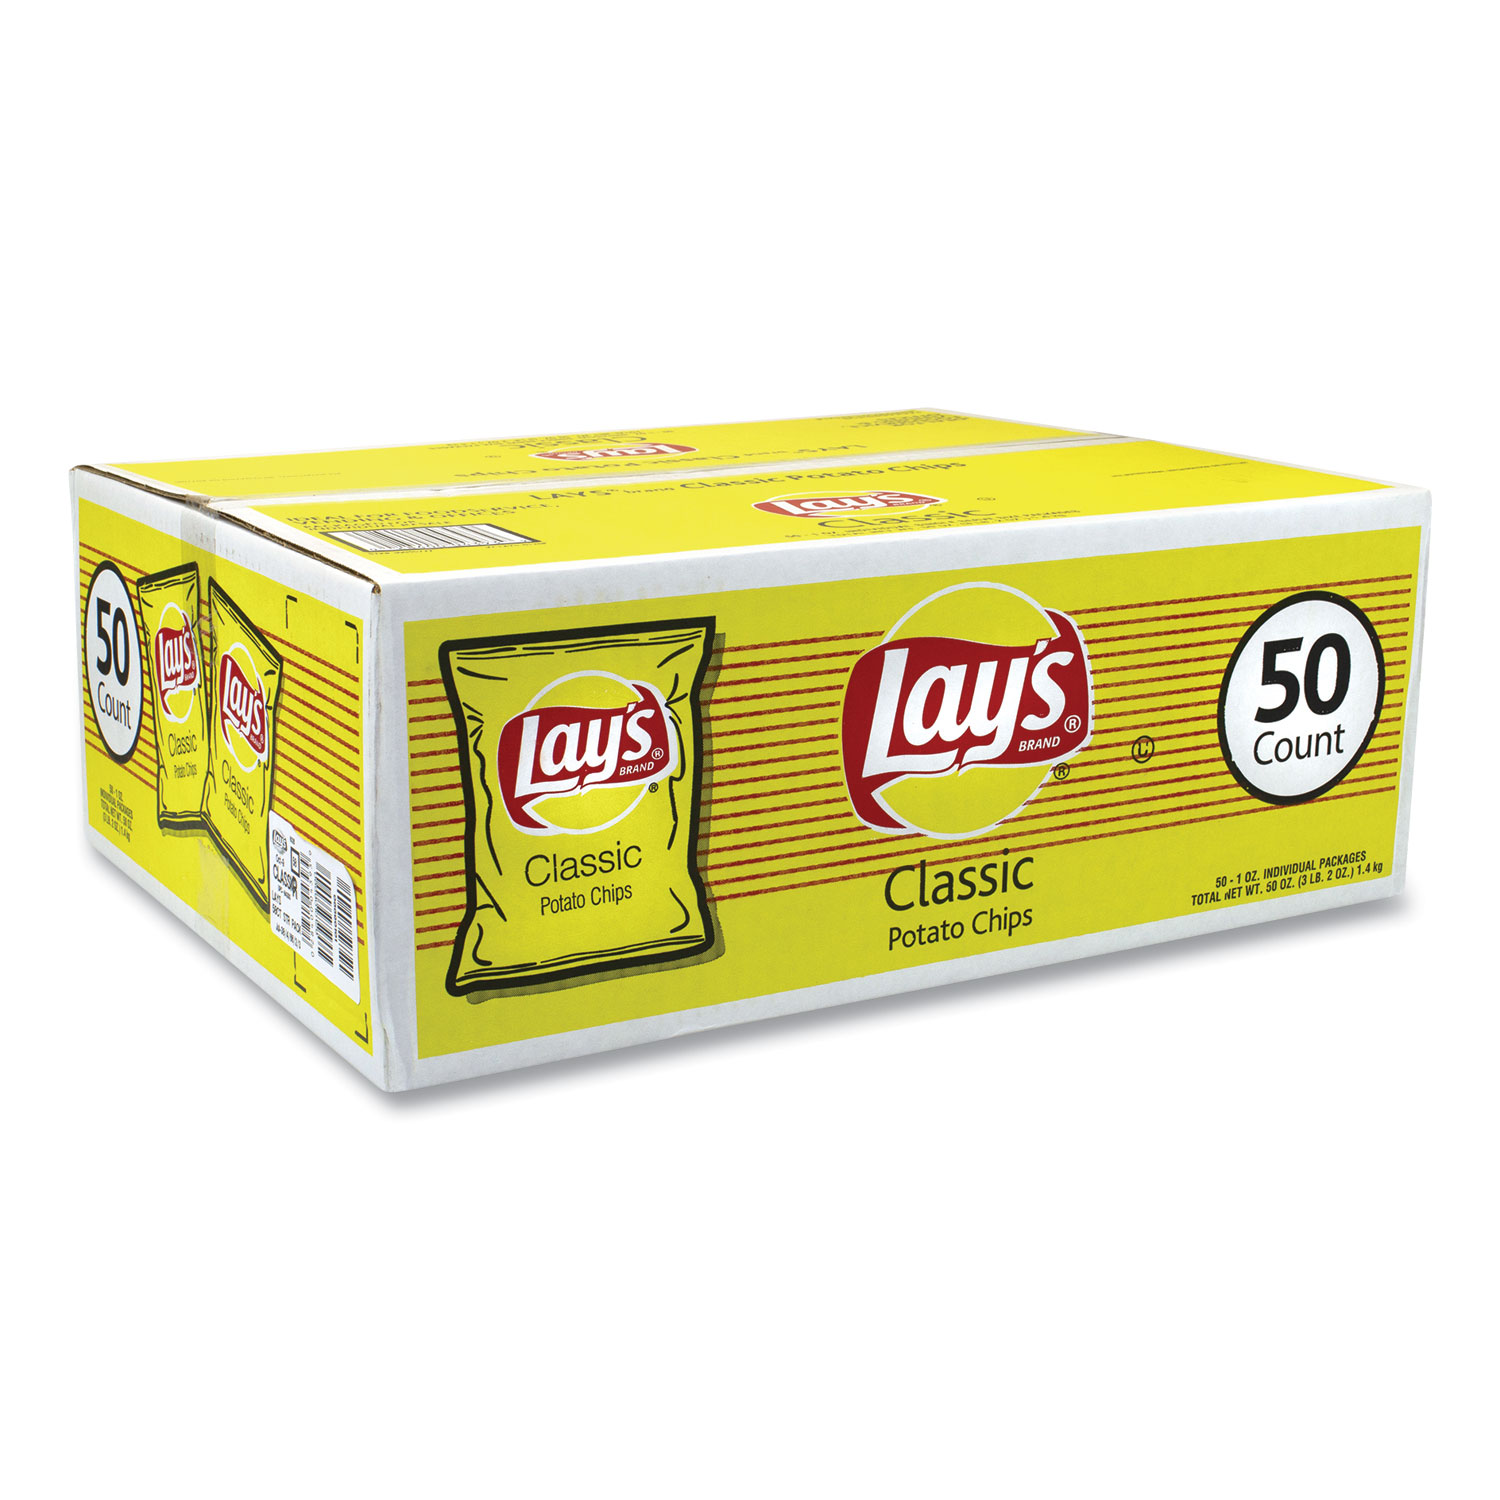  Lay's 32621 Regular Potato Chips, 1 oz Bag, 50/Carton, Free Delivery in 1-4 Business Days (GRR22000480) 